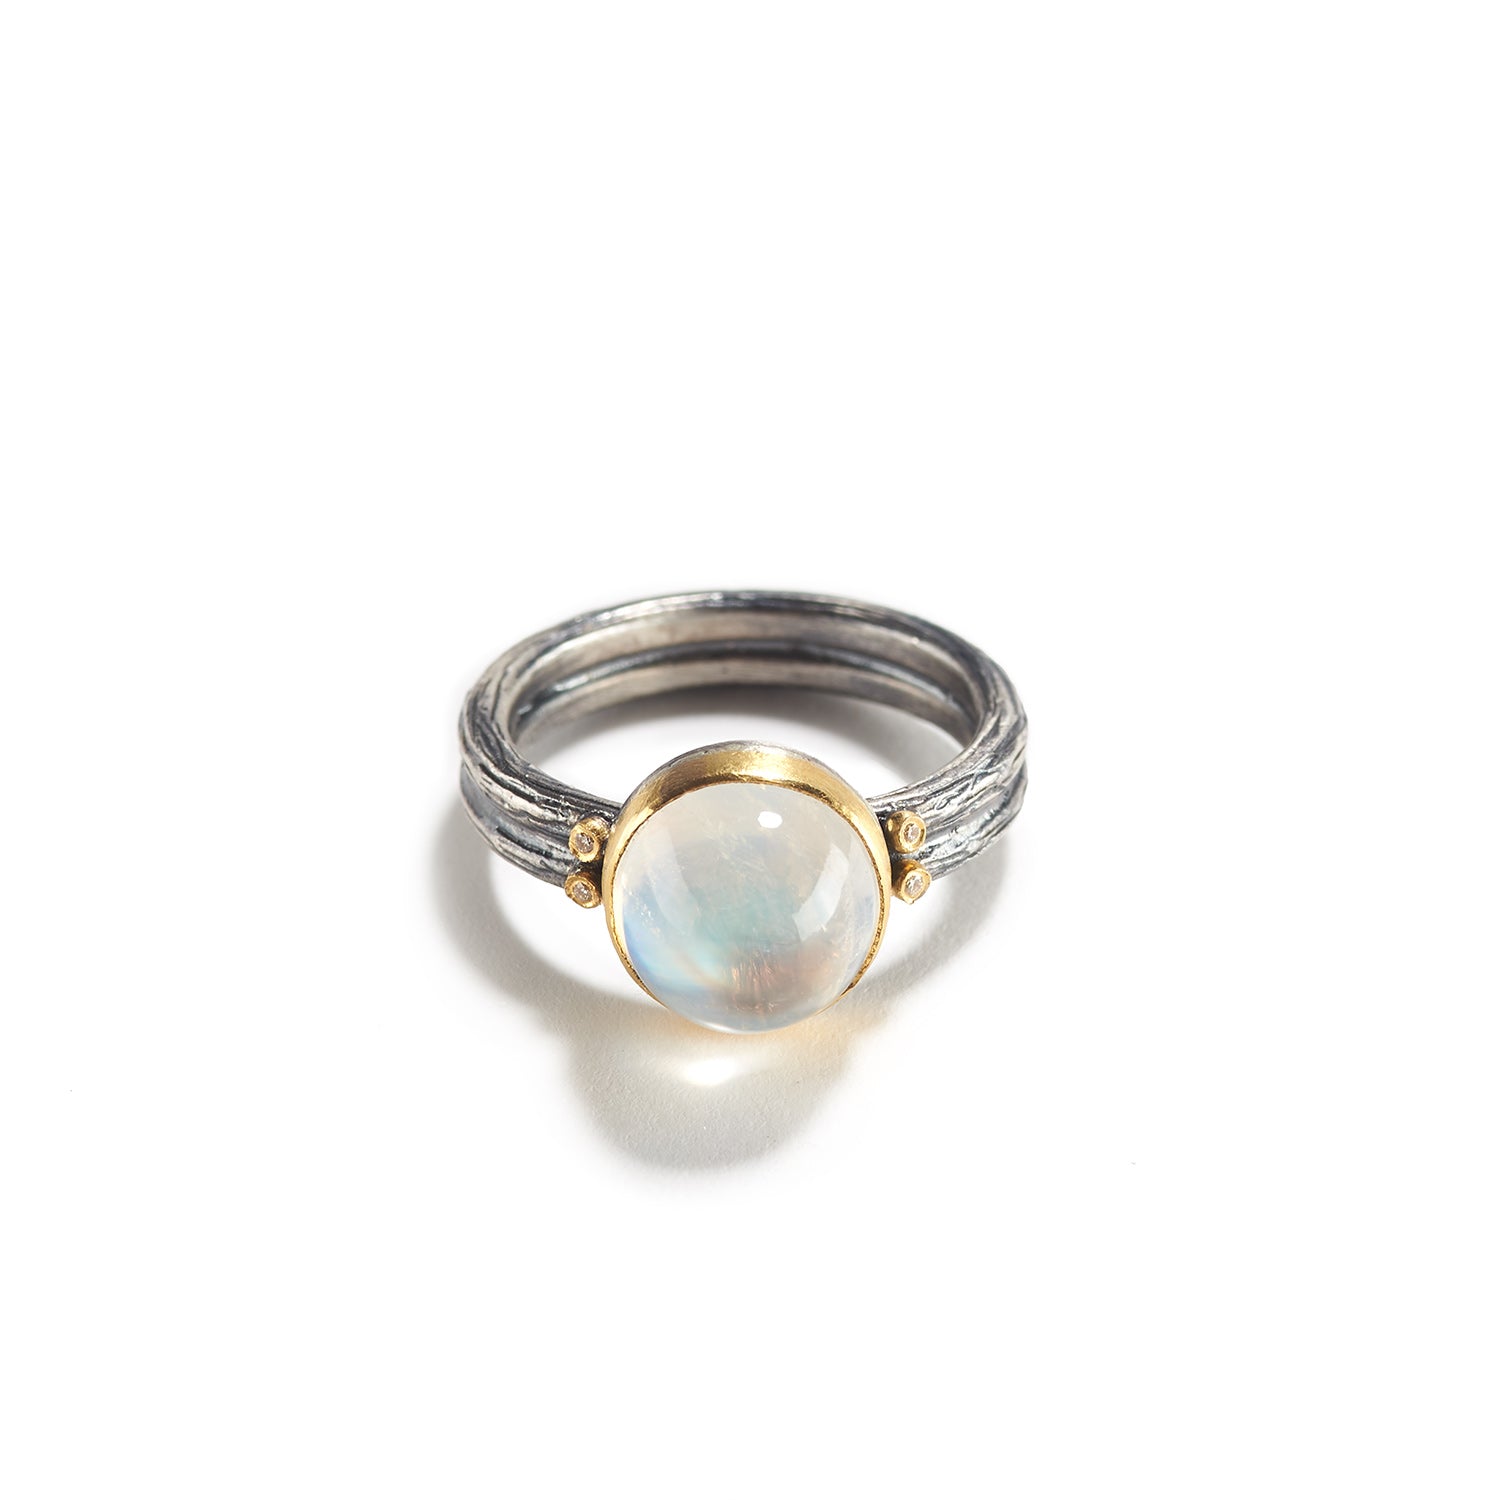 Moonstone, Diamond and Silver Ring